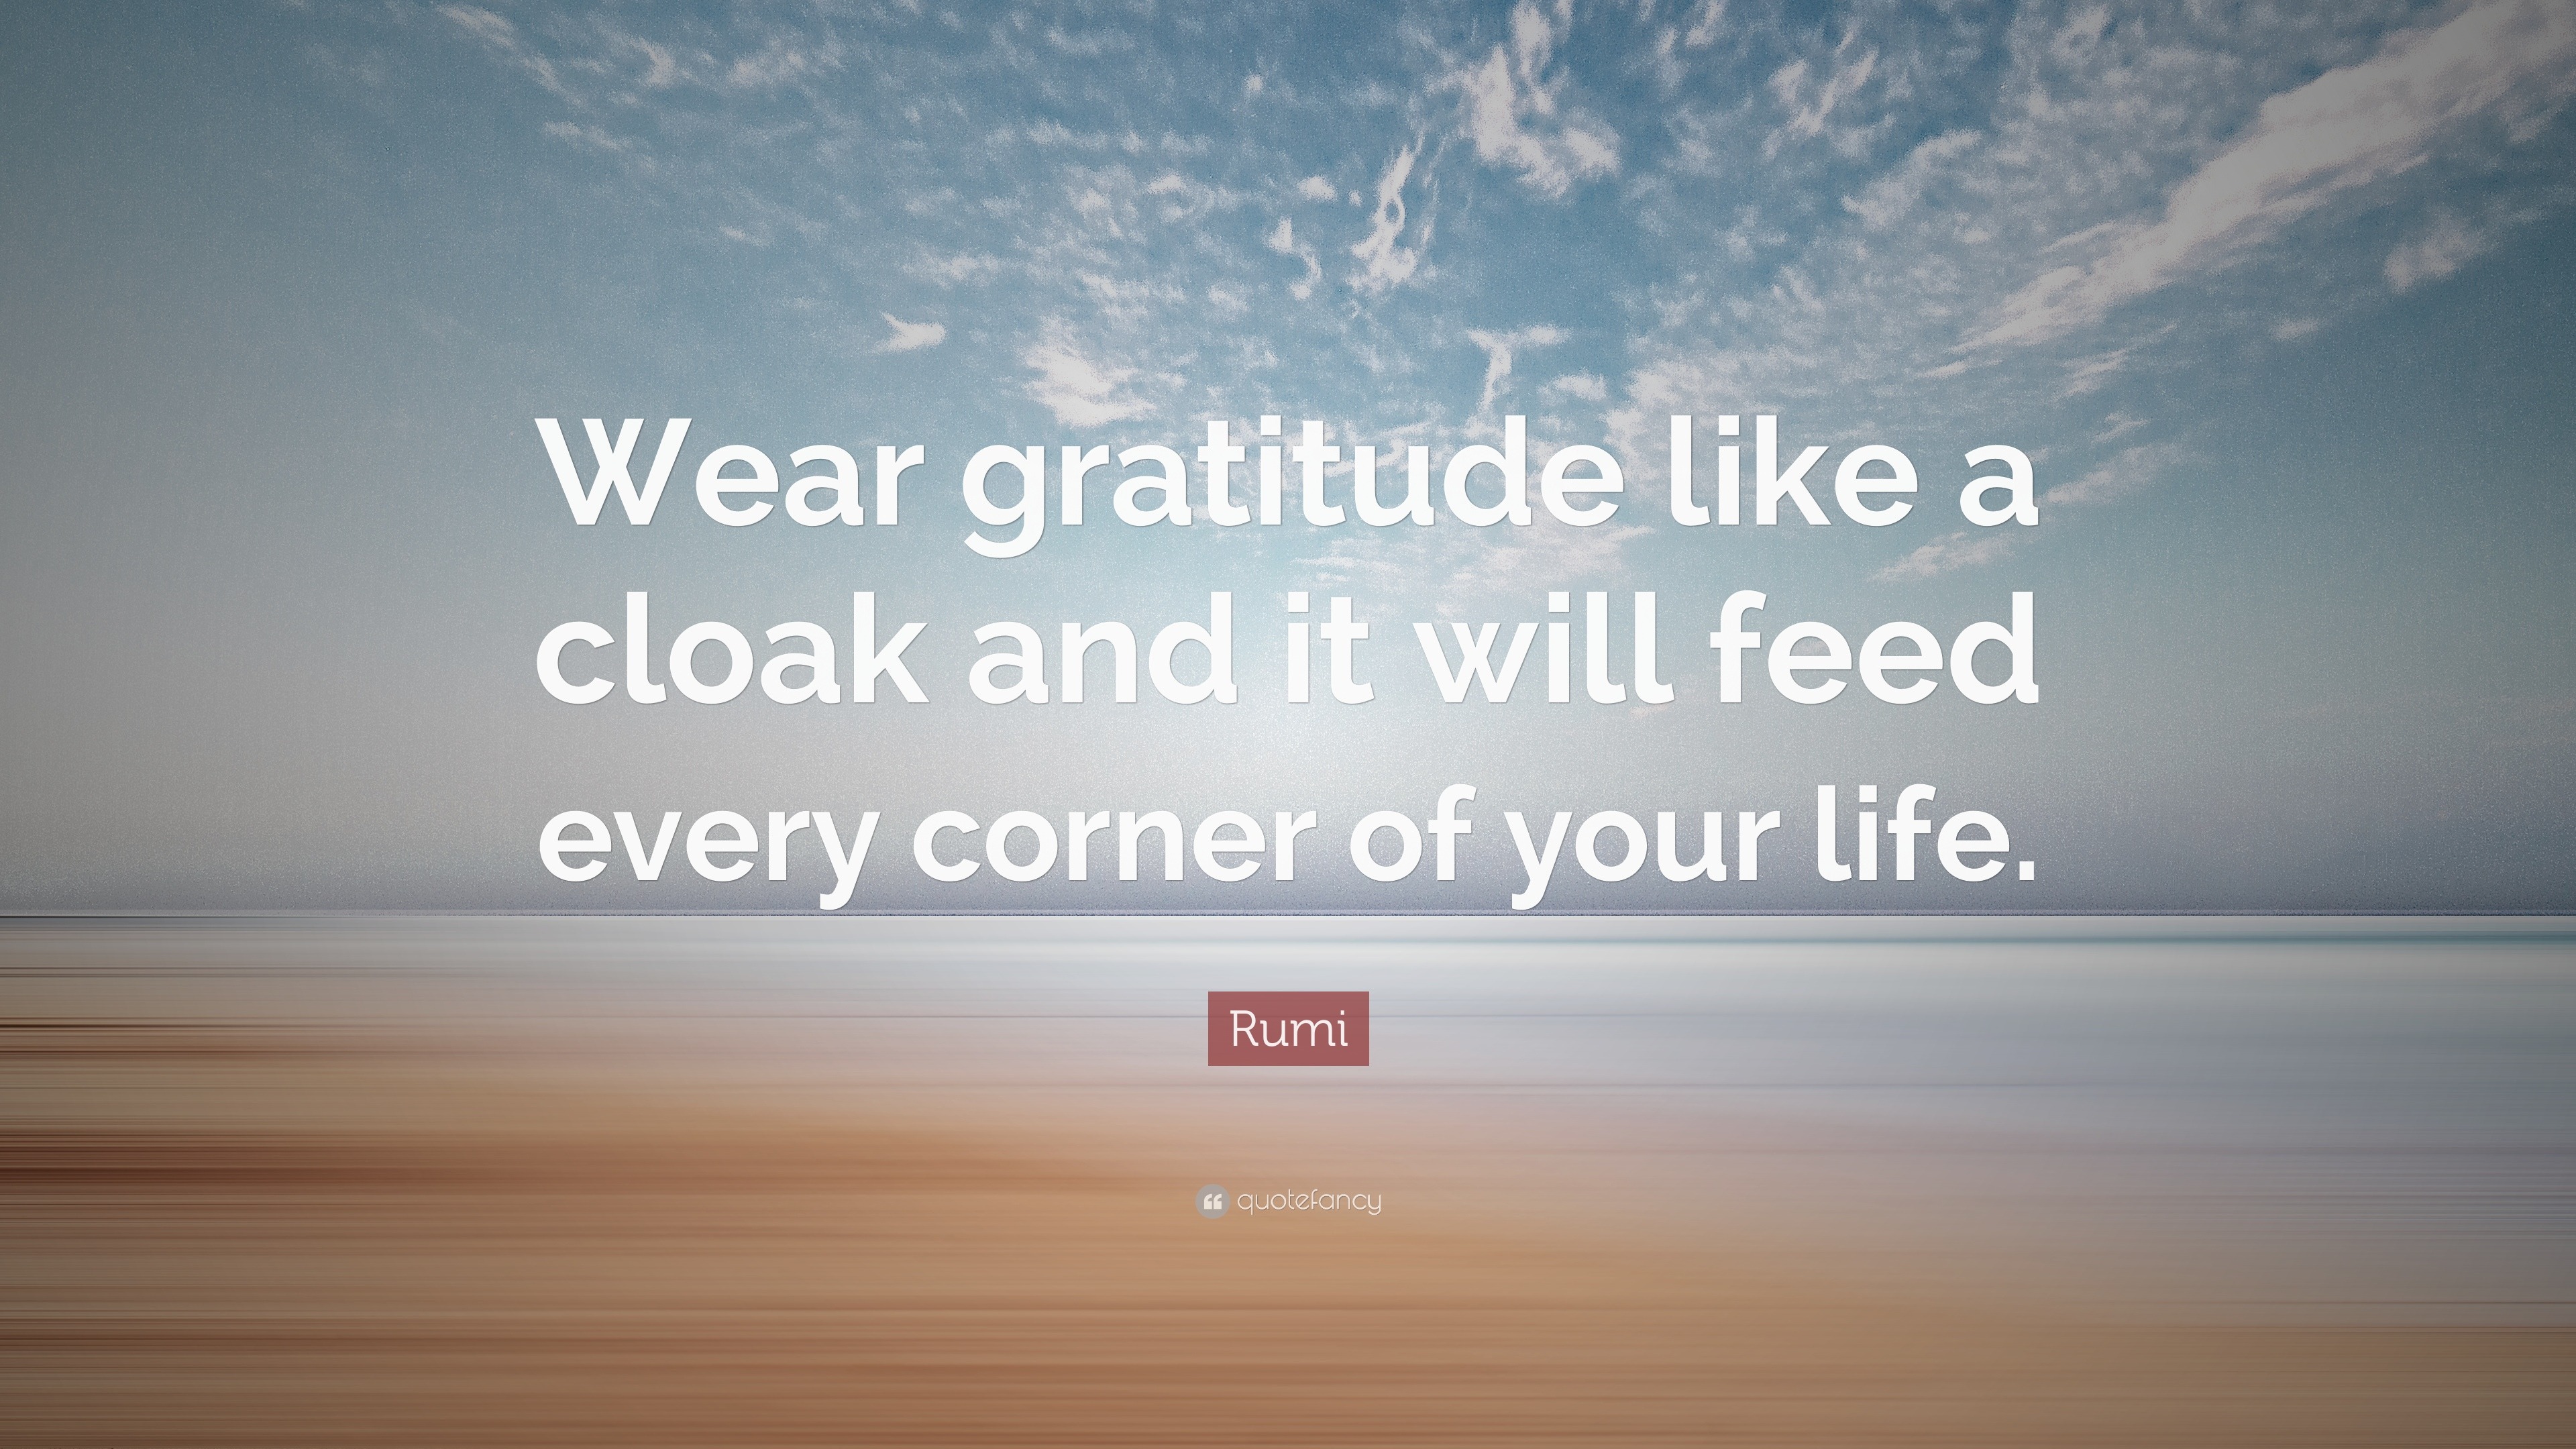 Rumi Quote: “Wear gratitude like a cloak and it will feed every corner